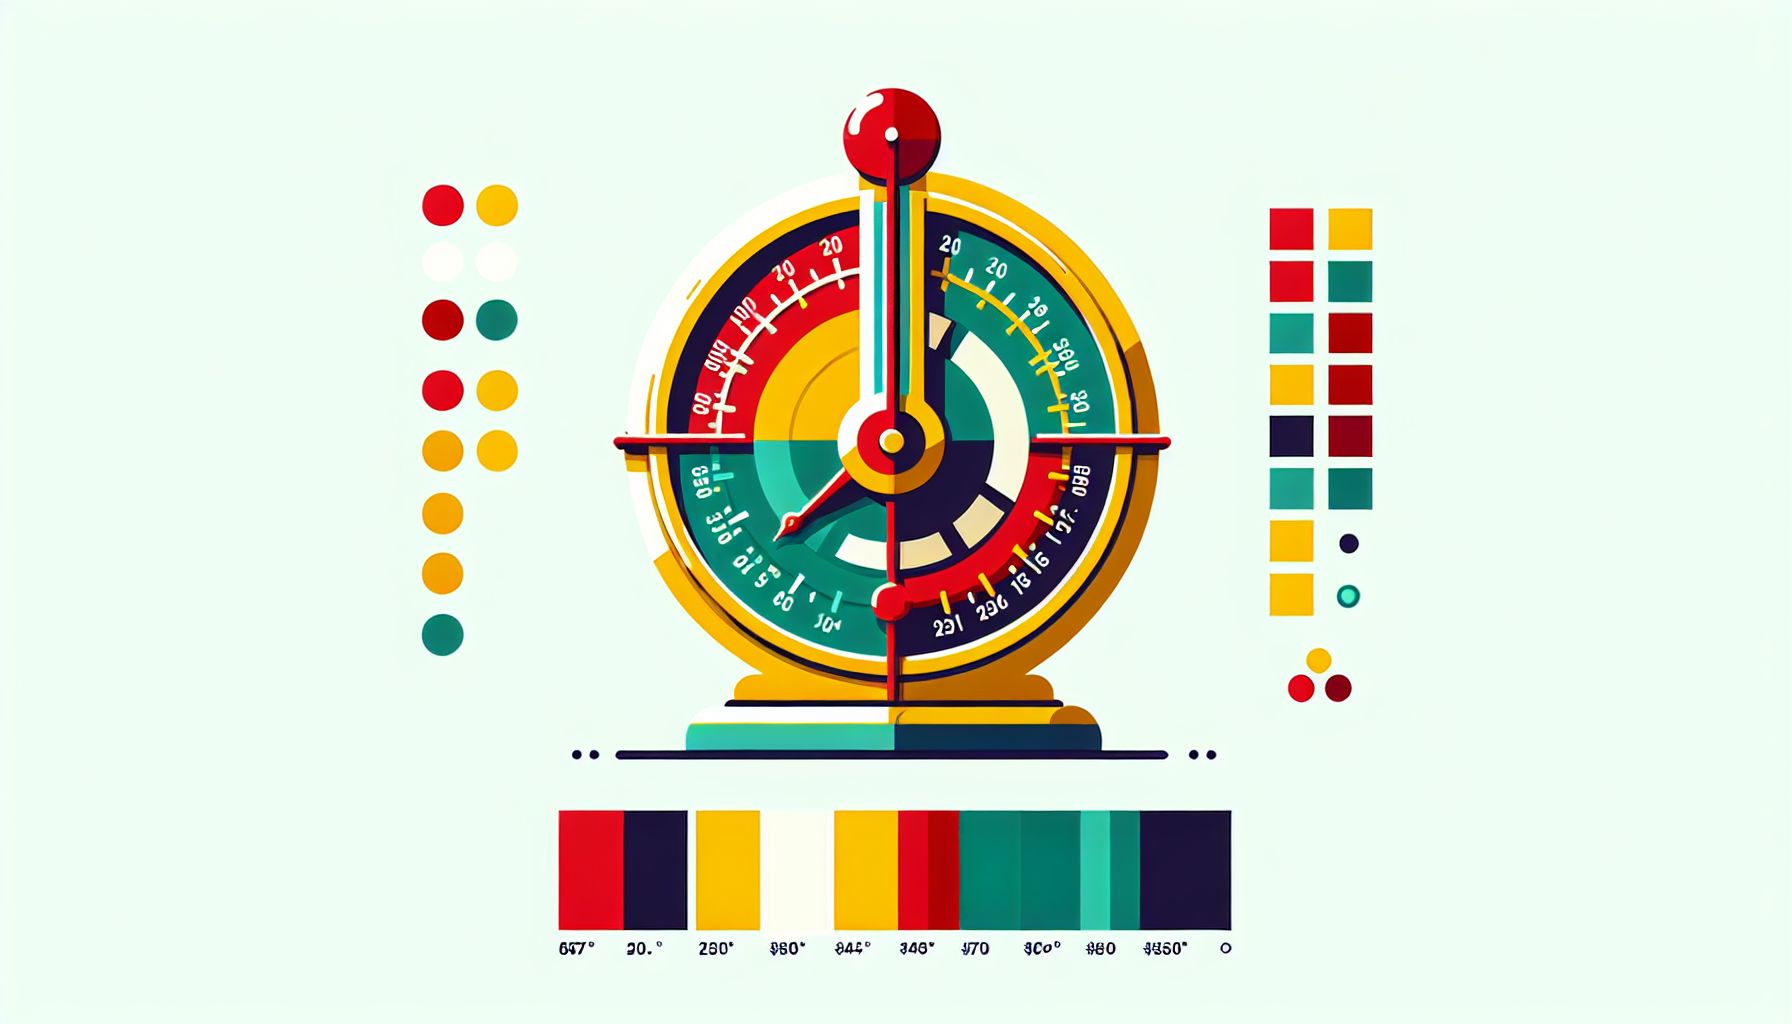 Barometer in flat illustration style and white background, red #f47574, green #88c7a8, yellow #fcc44b, and blue #645bc8 colors.